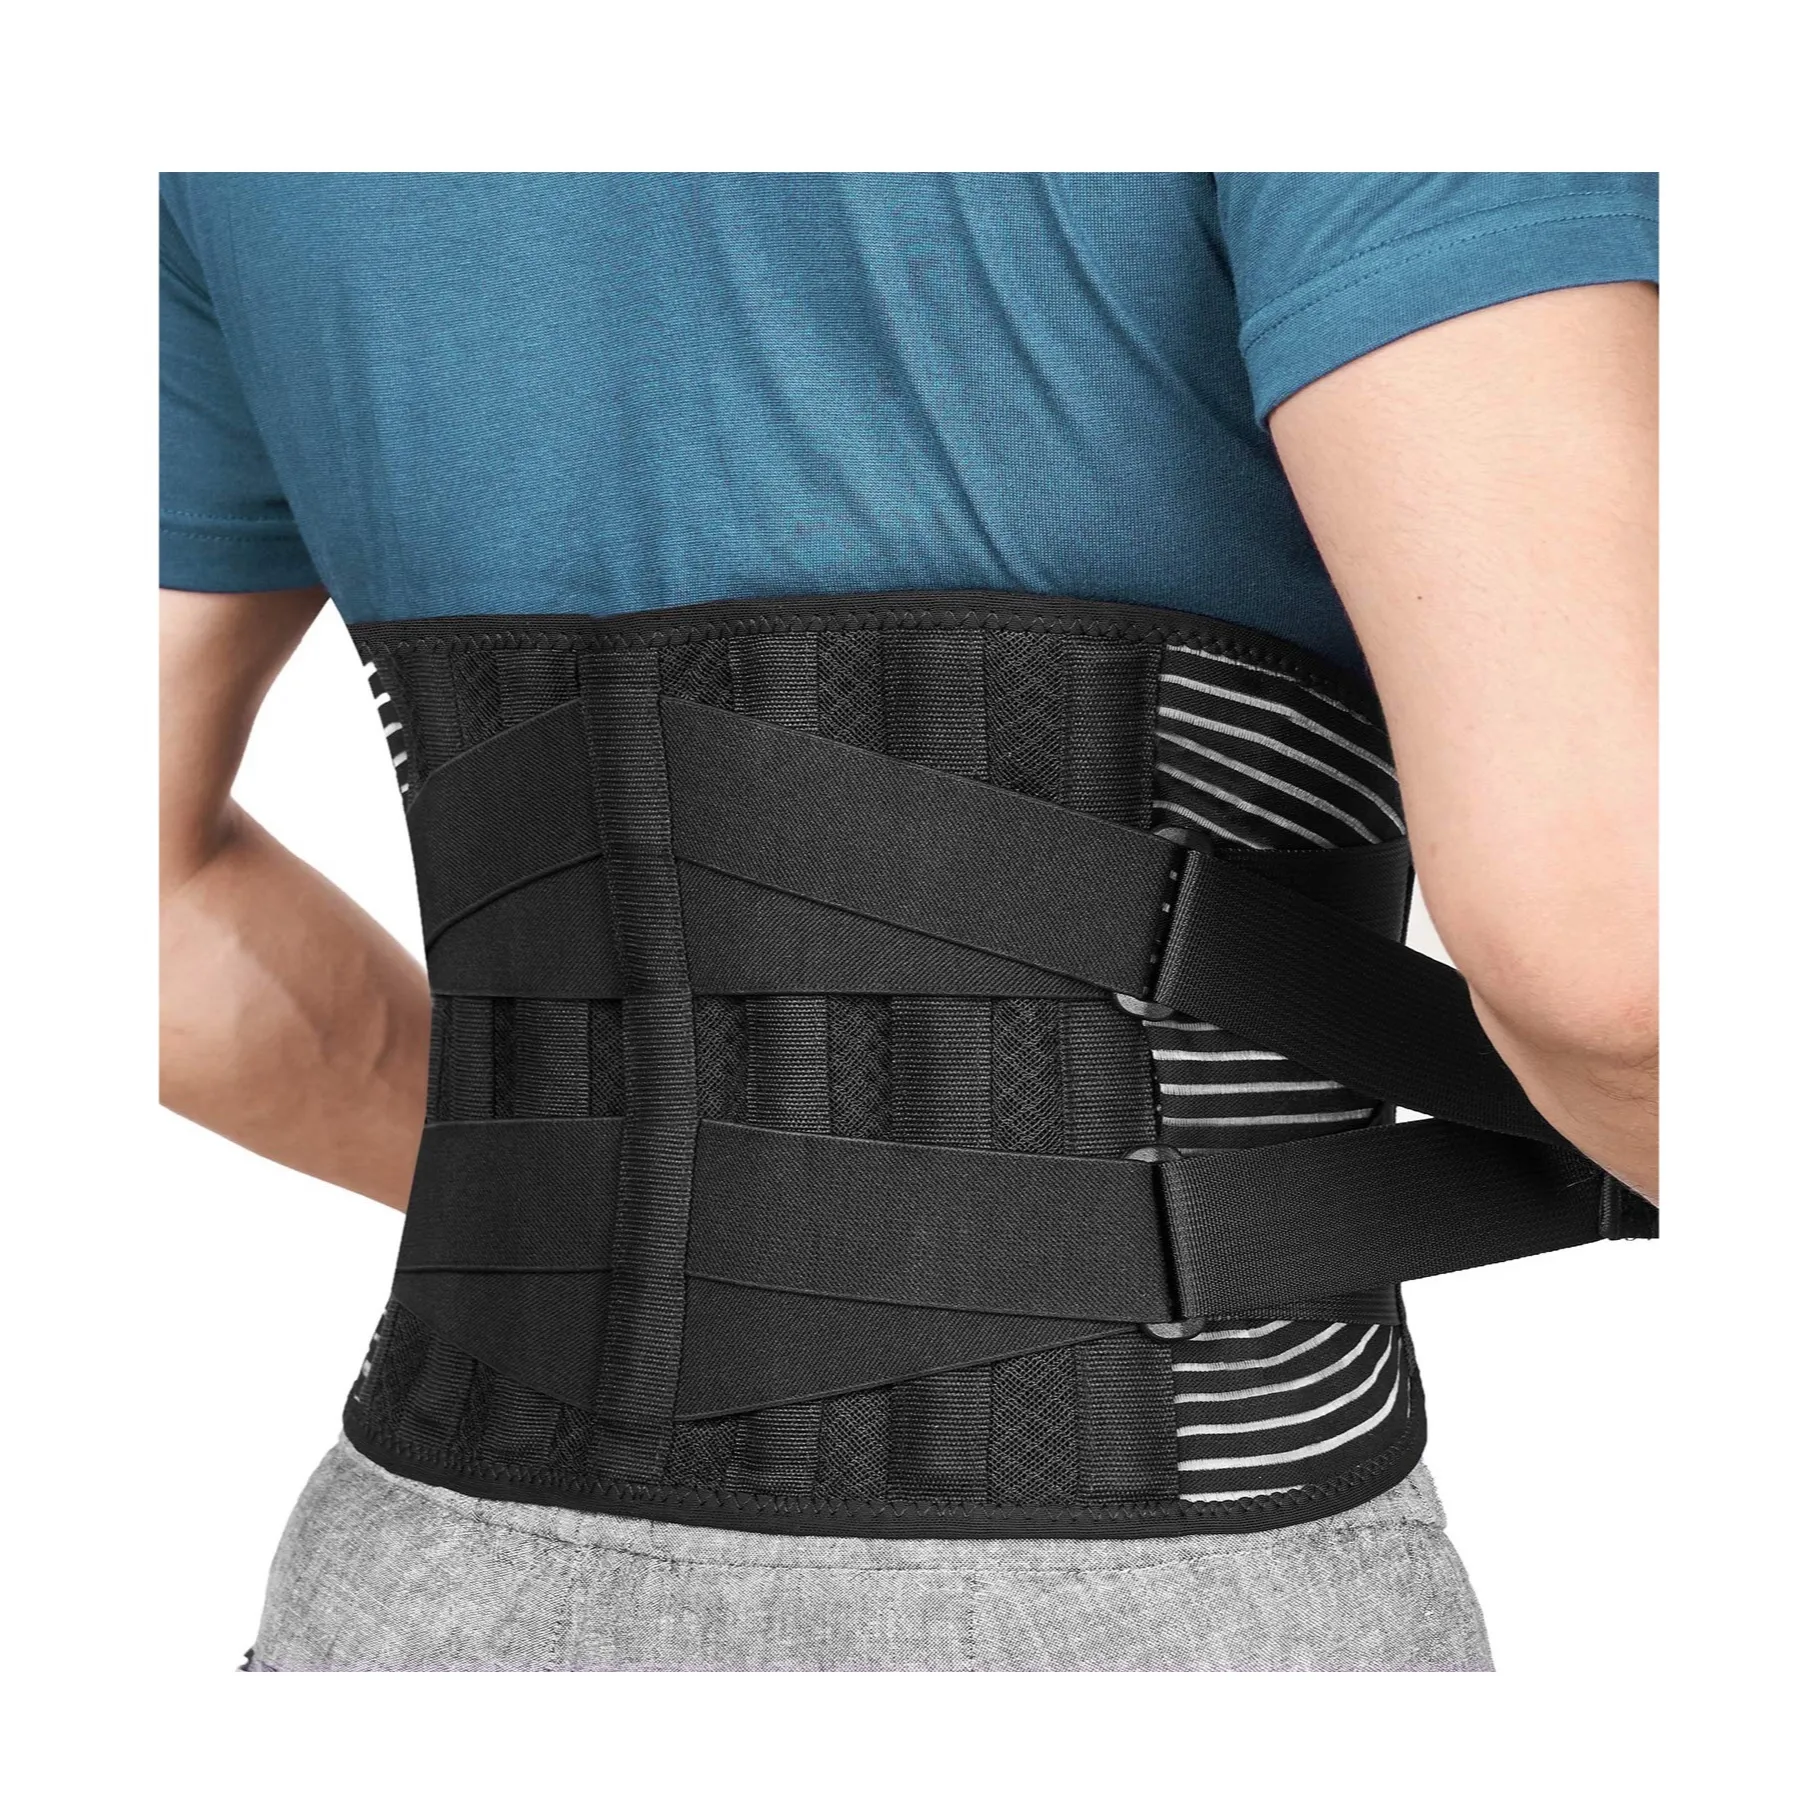 waist support Back Braces for Lower Back Pain Relief with 6 Stays Breathable Back Support Belt for Men Women for work OEM